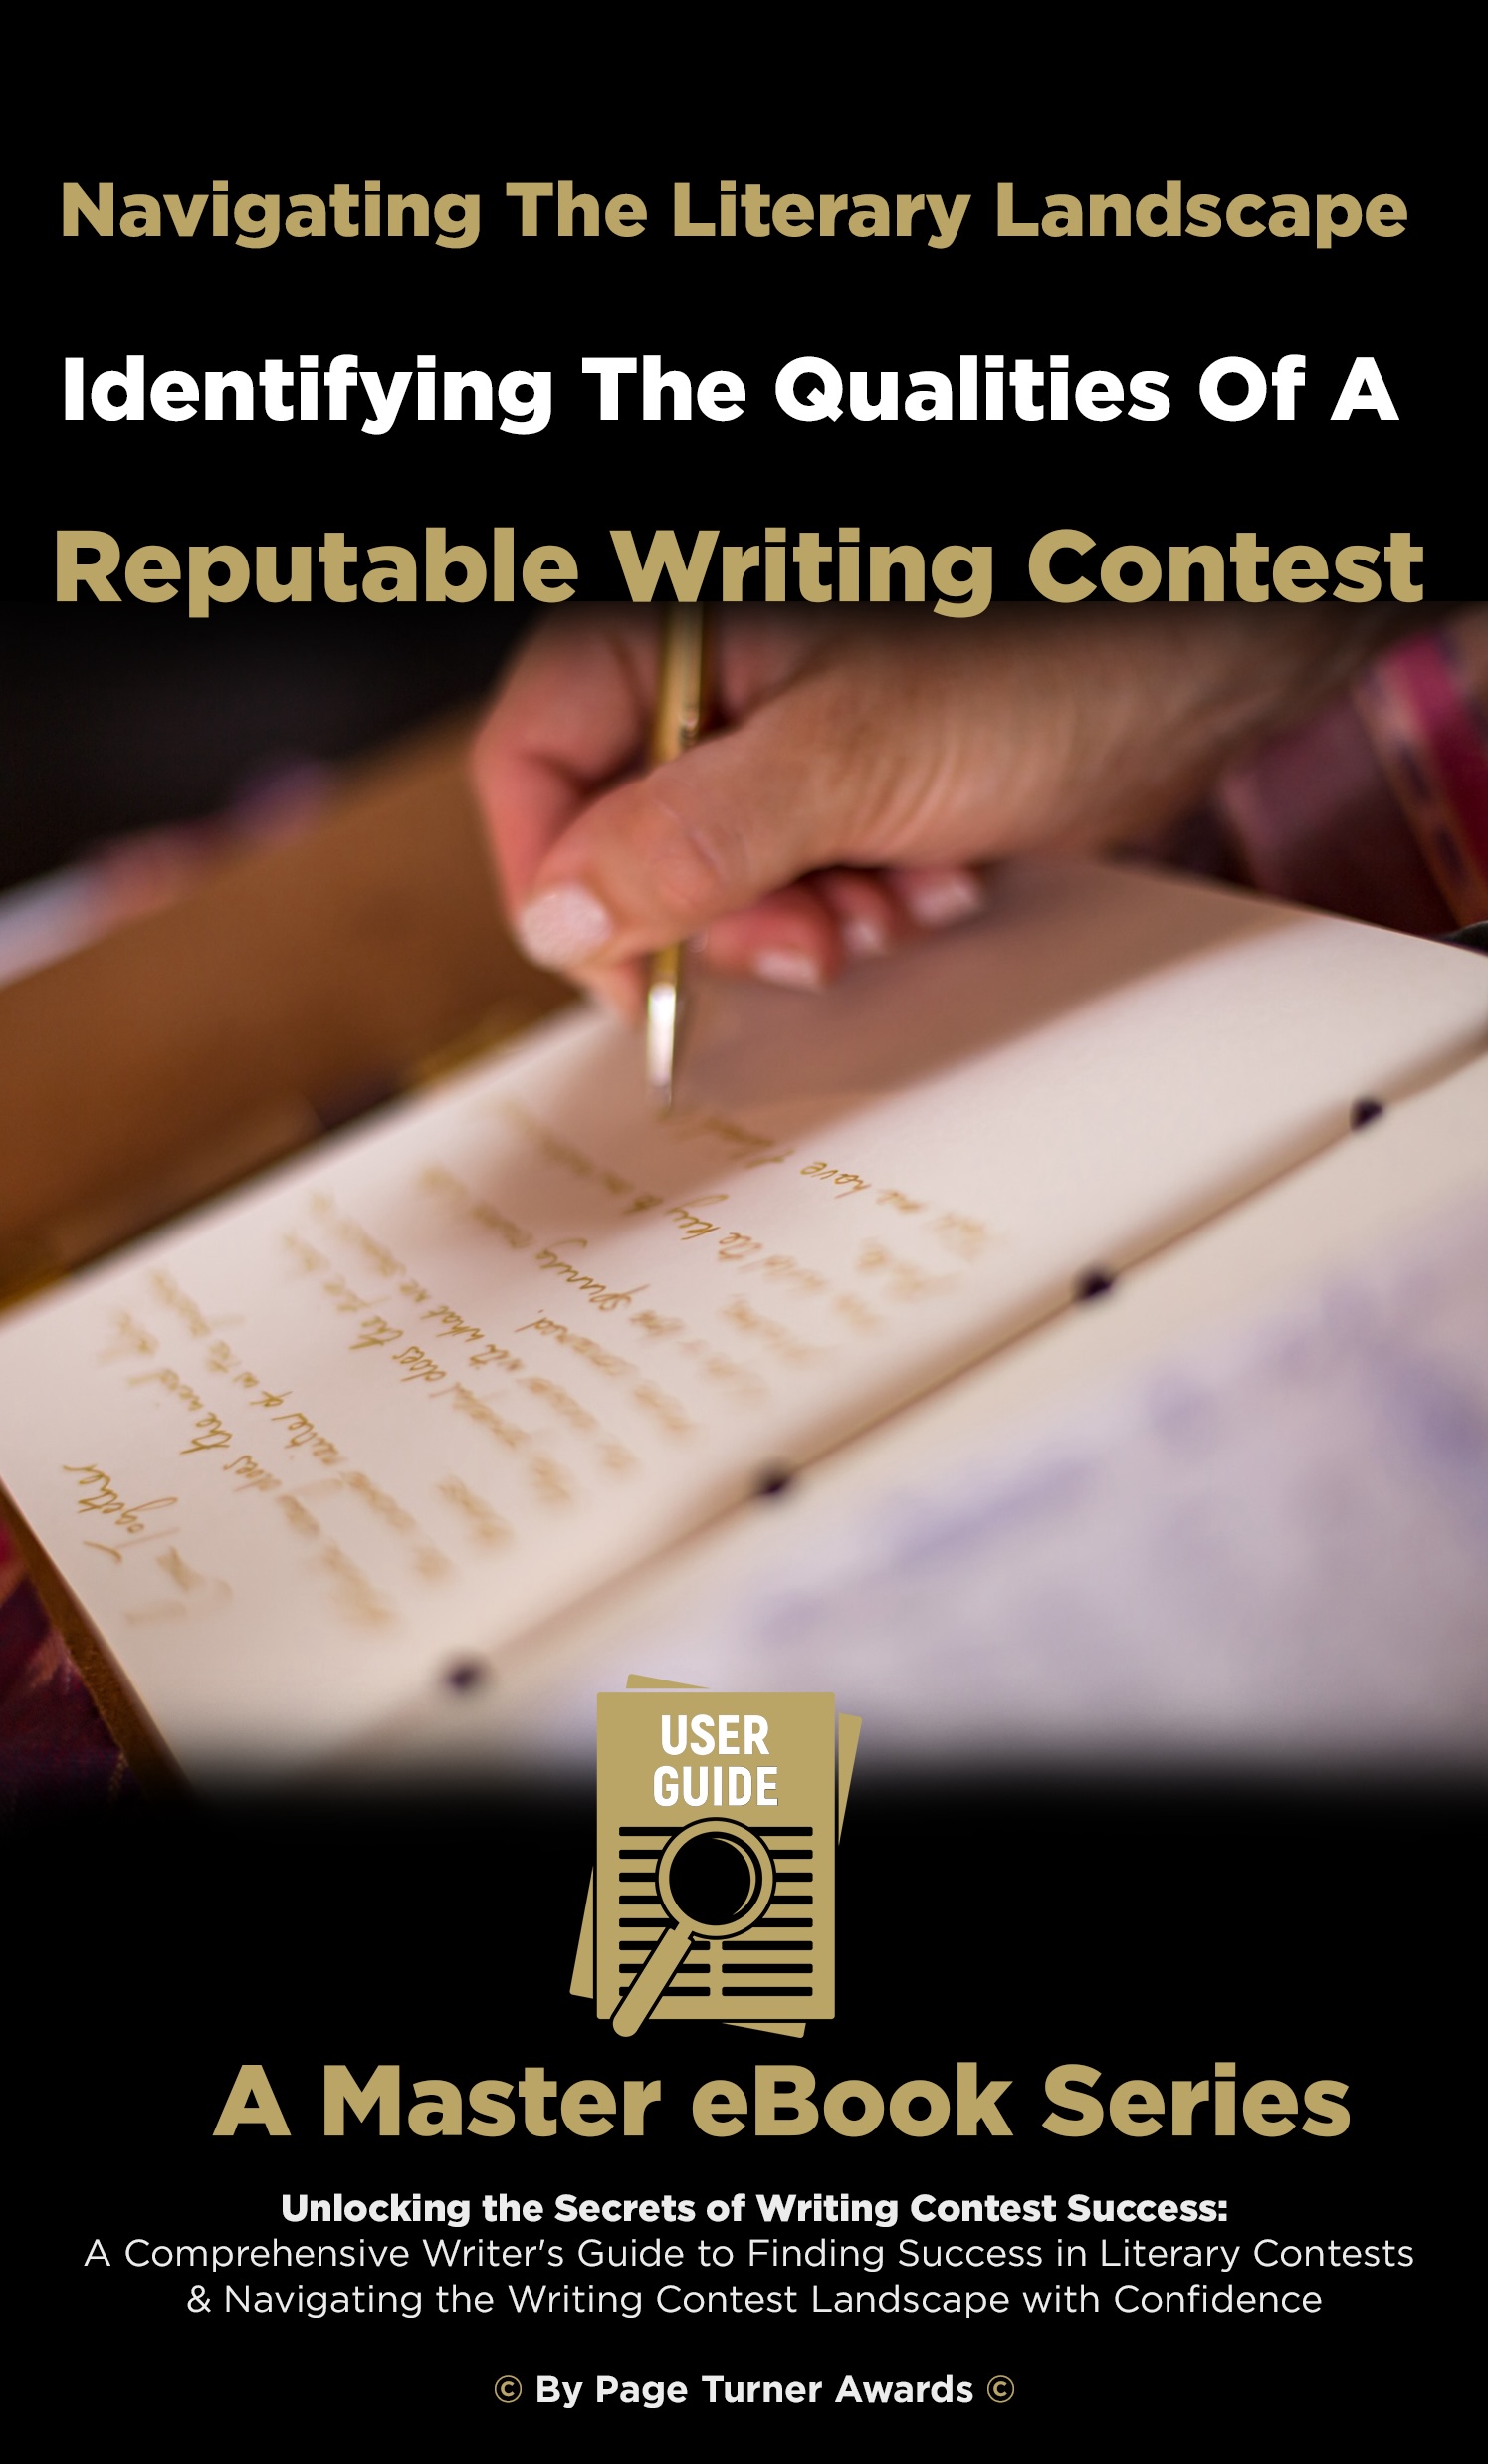 Navigating The Literary Landscape: Identifying The Qualities Of A Reputable Writing Contest